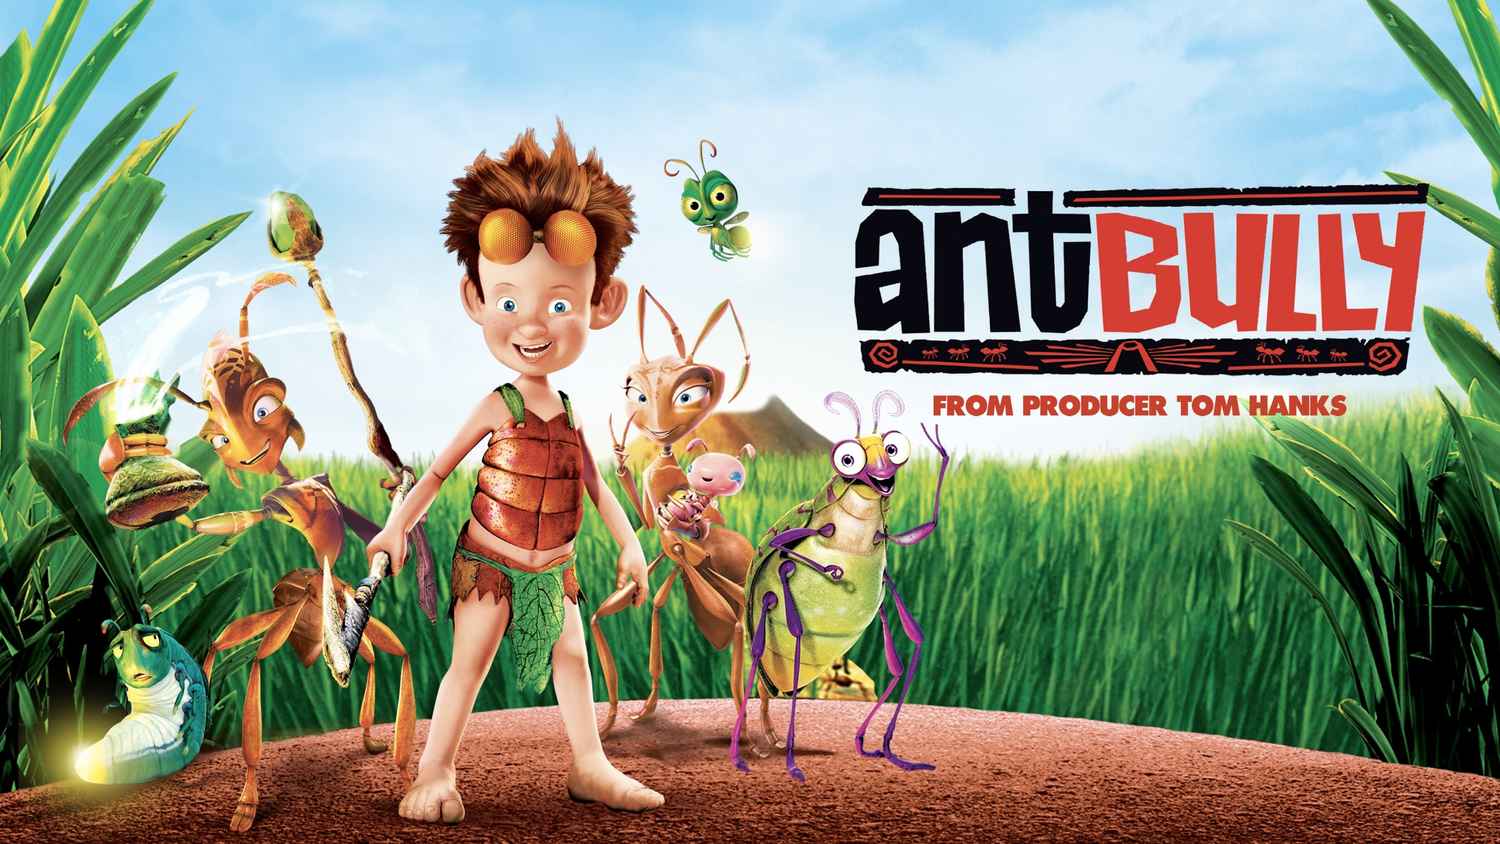 Watch The Ant Bully Full Movie Online, Release Date, Trailer, Cast and Song...